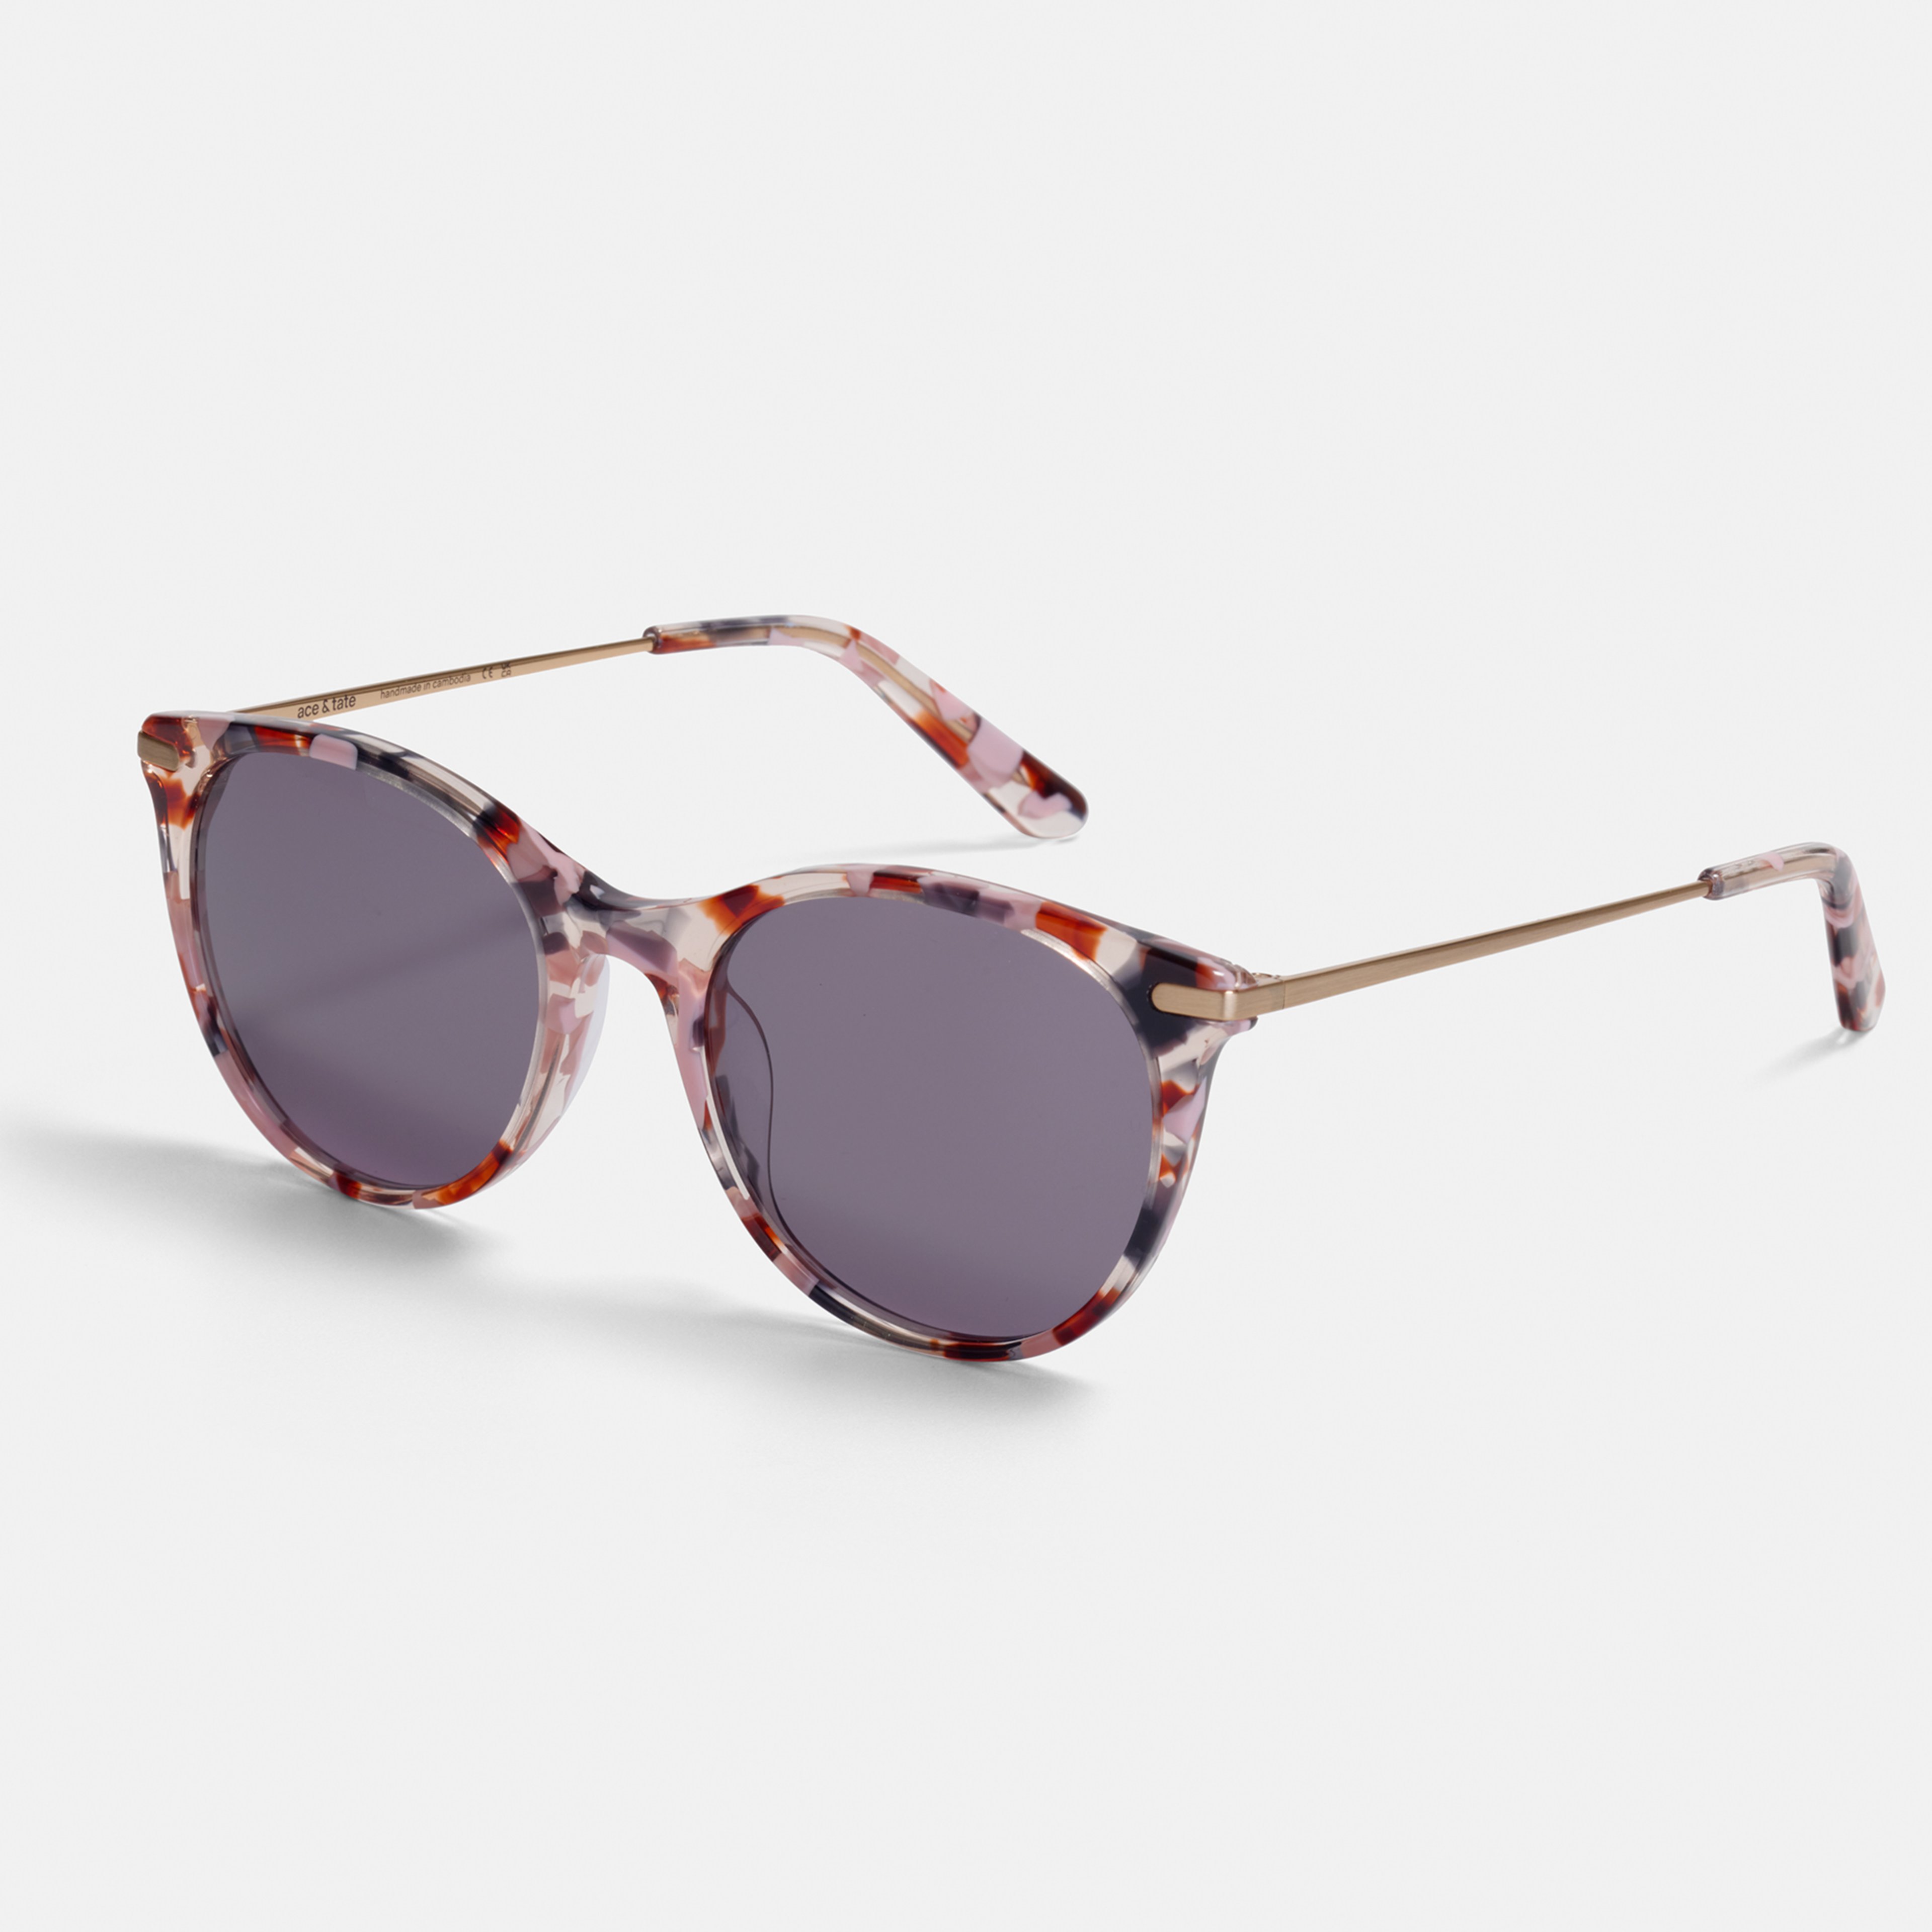 Ace & Tate Solaires | ronde combinaison in Gris, Violet, Rouge